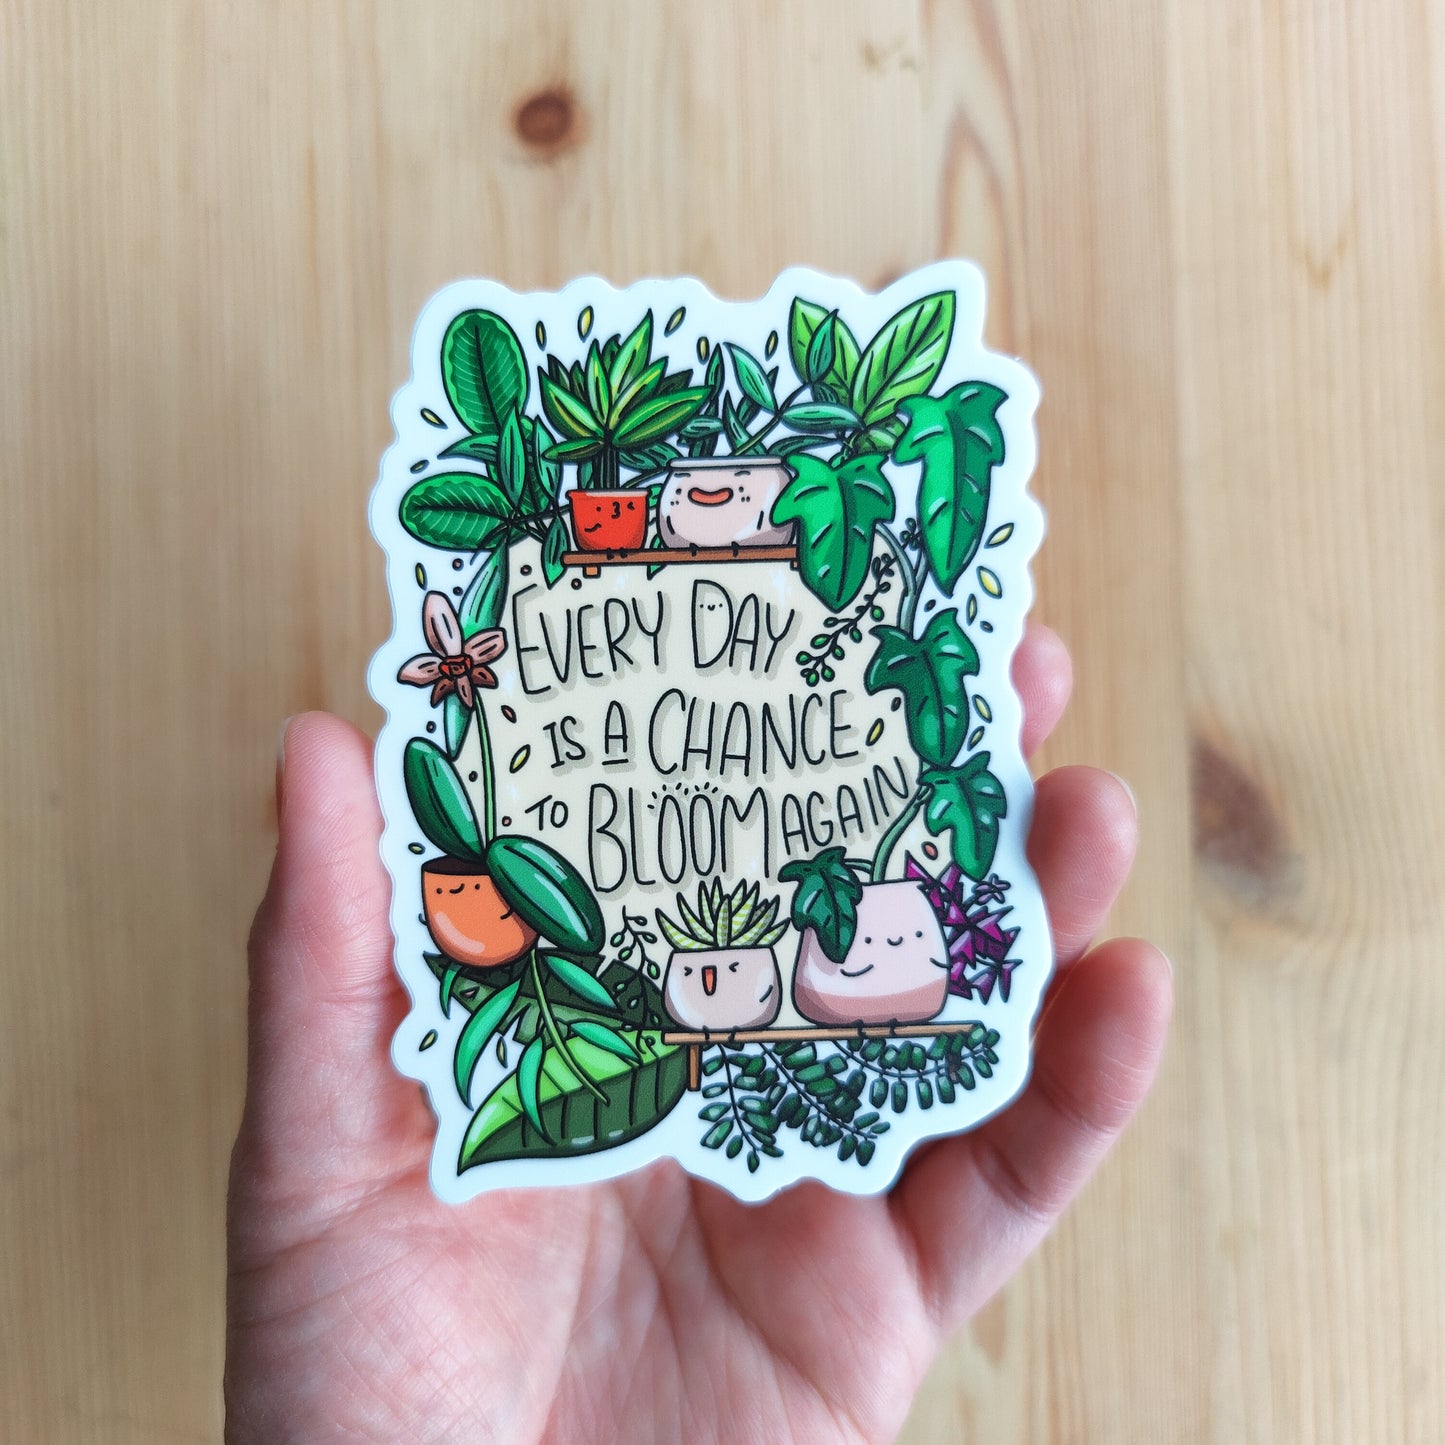 Everyday is a chance to bloom again Vinyl Sticker